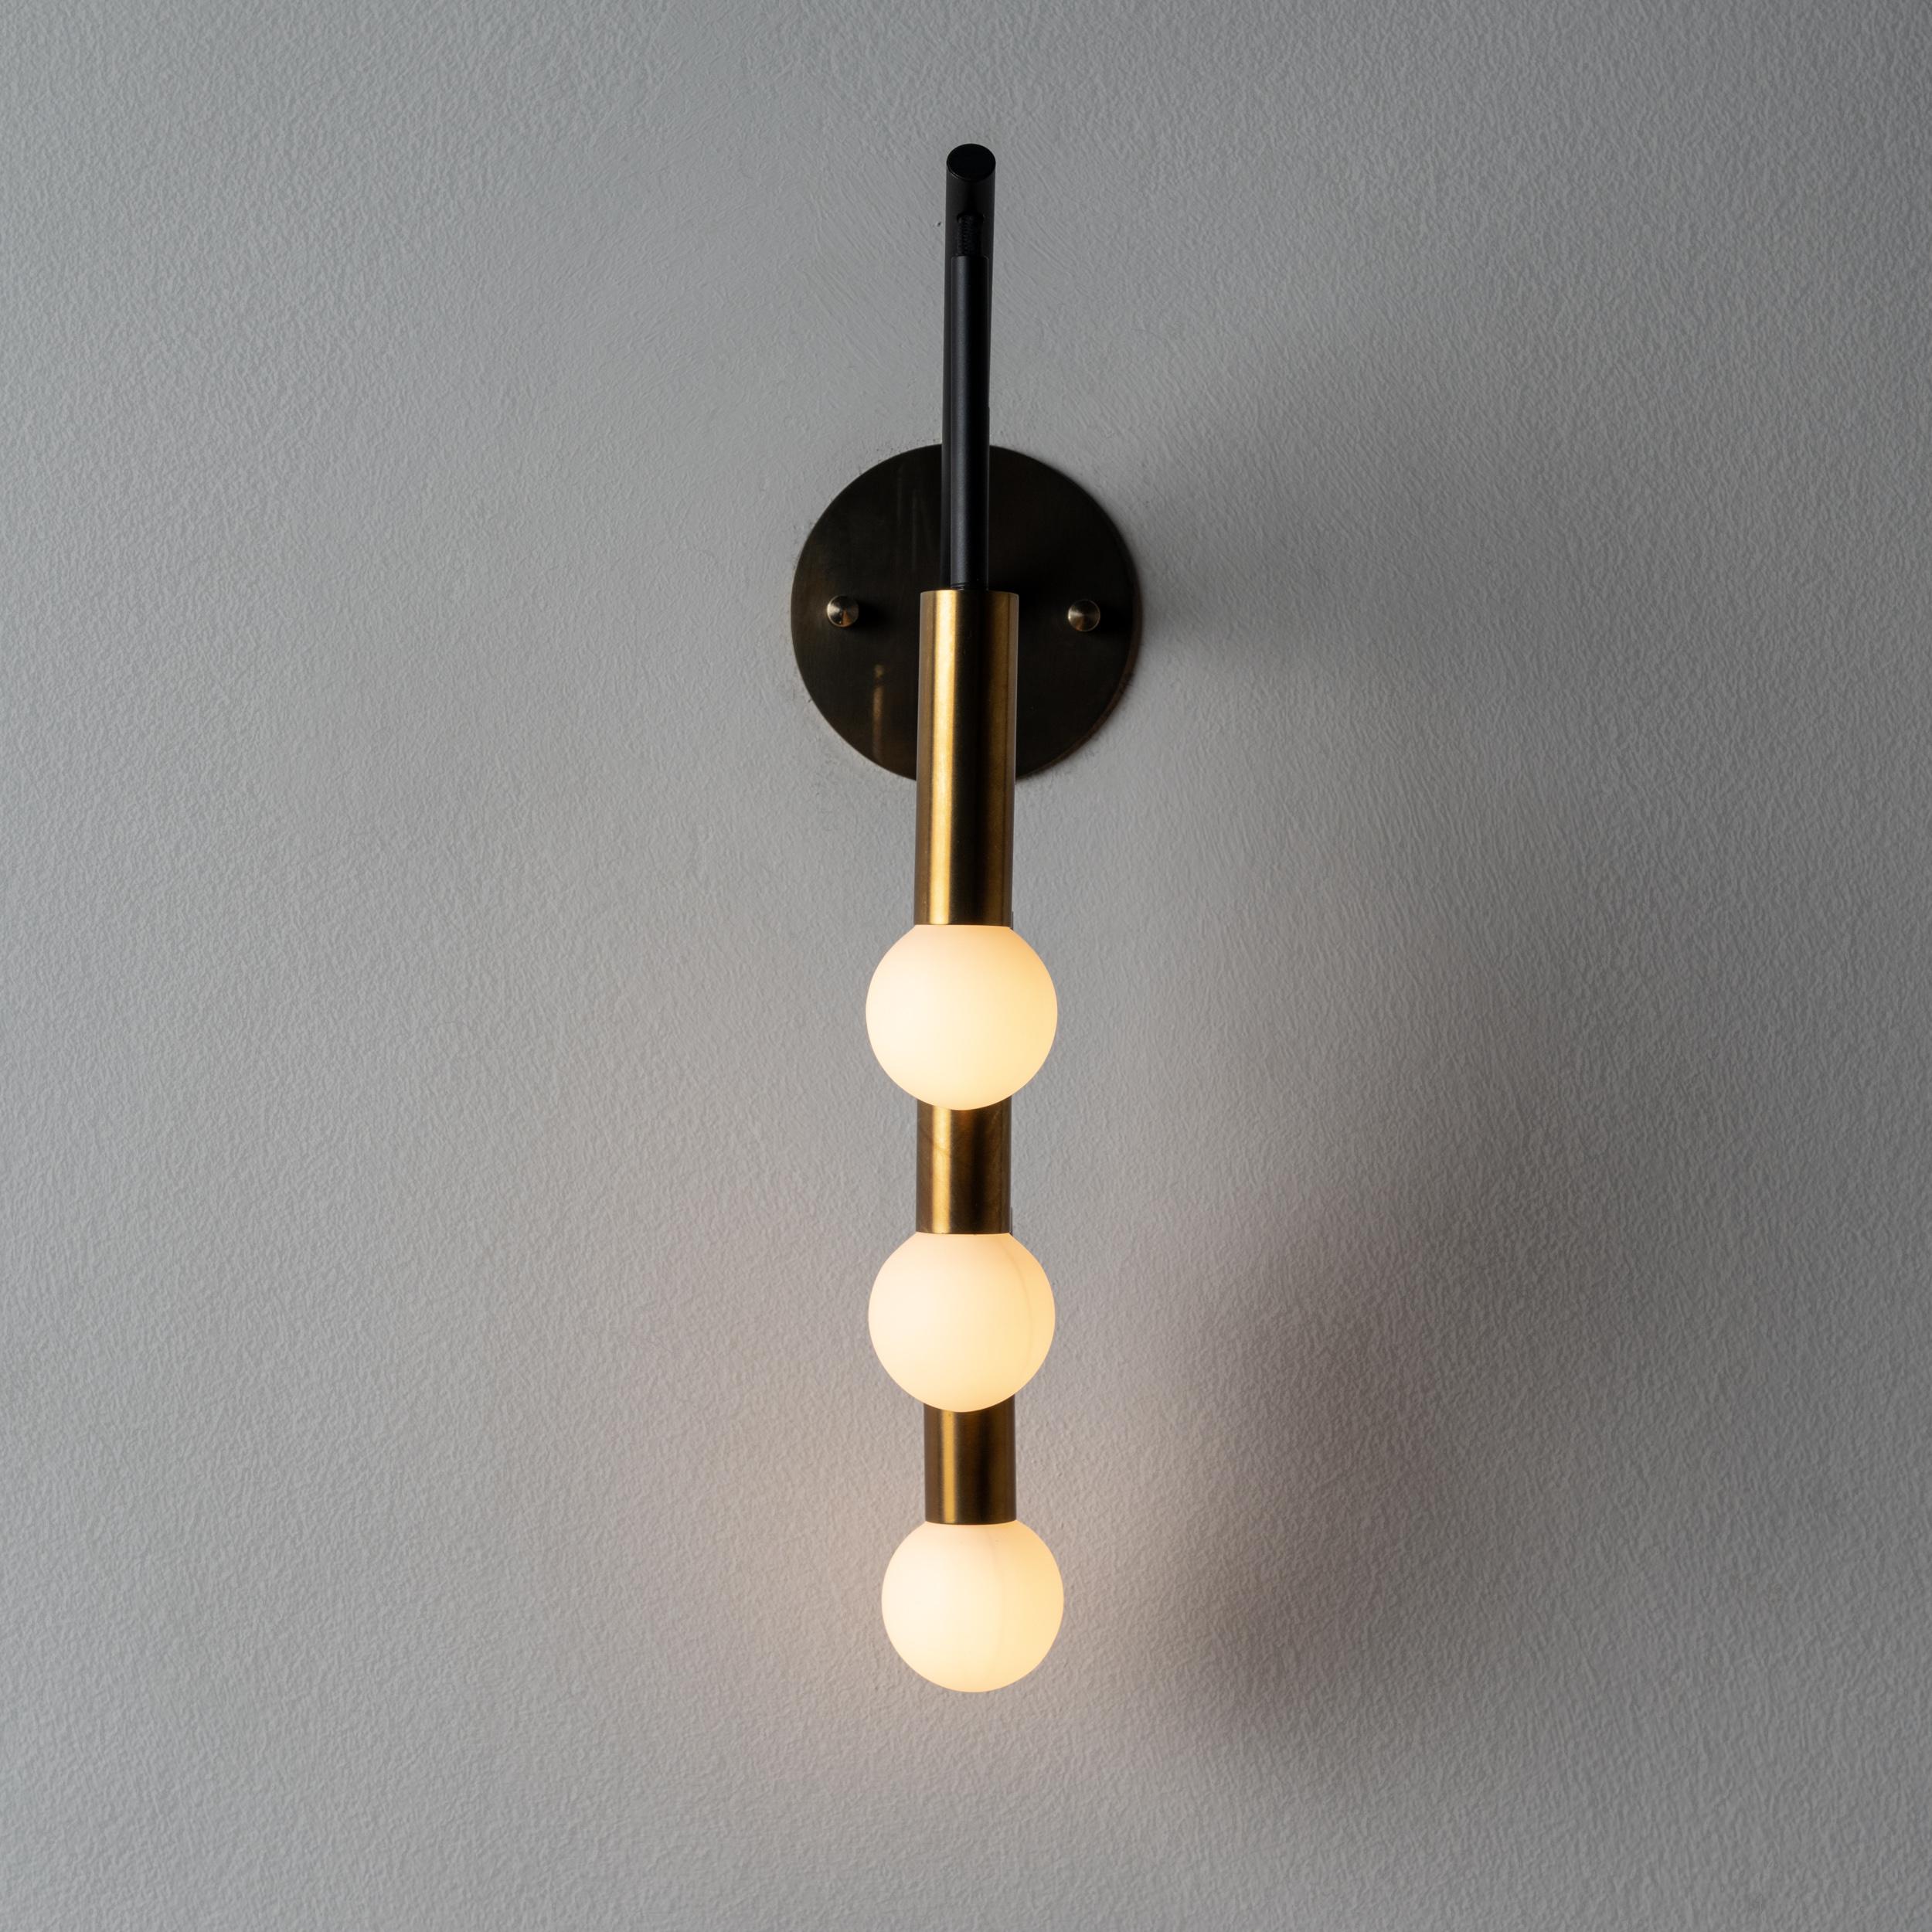 Rewire Custom Wall Light in the style of Interlampadario. Brass, metal. Manufactured in Los Angeles. We recommend. Lamping: 120v 3Qty E12 Candelabra Socket w/ 40w Frosted Bulb/ Lightbulbs not included. Priced and sold individually.